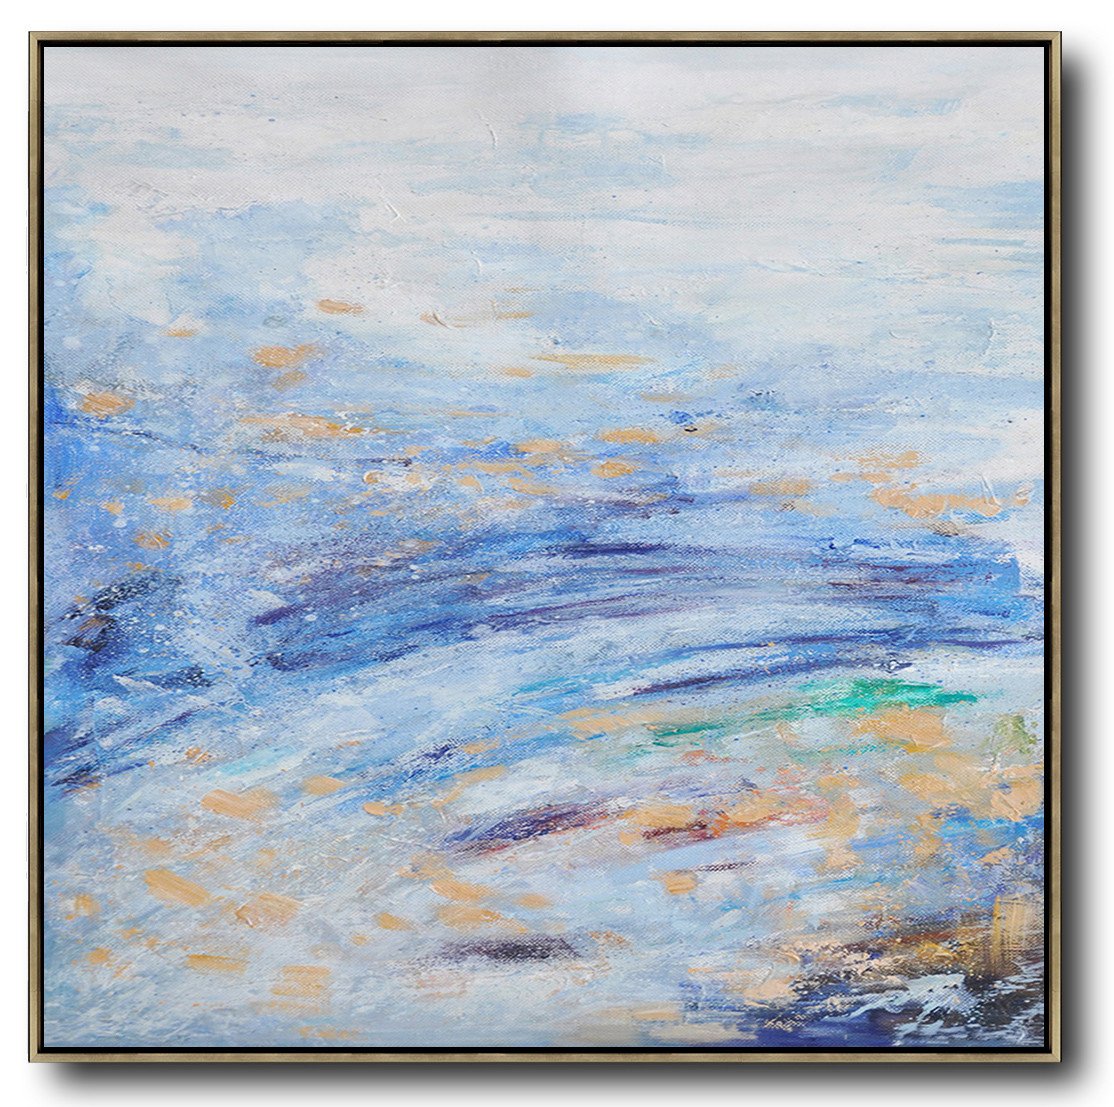 Hand-painted oversized Abstract Landscape Oil Painting by Jackson abstract paintings for sale